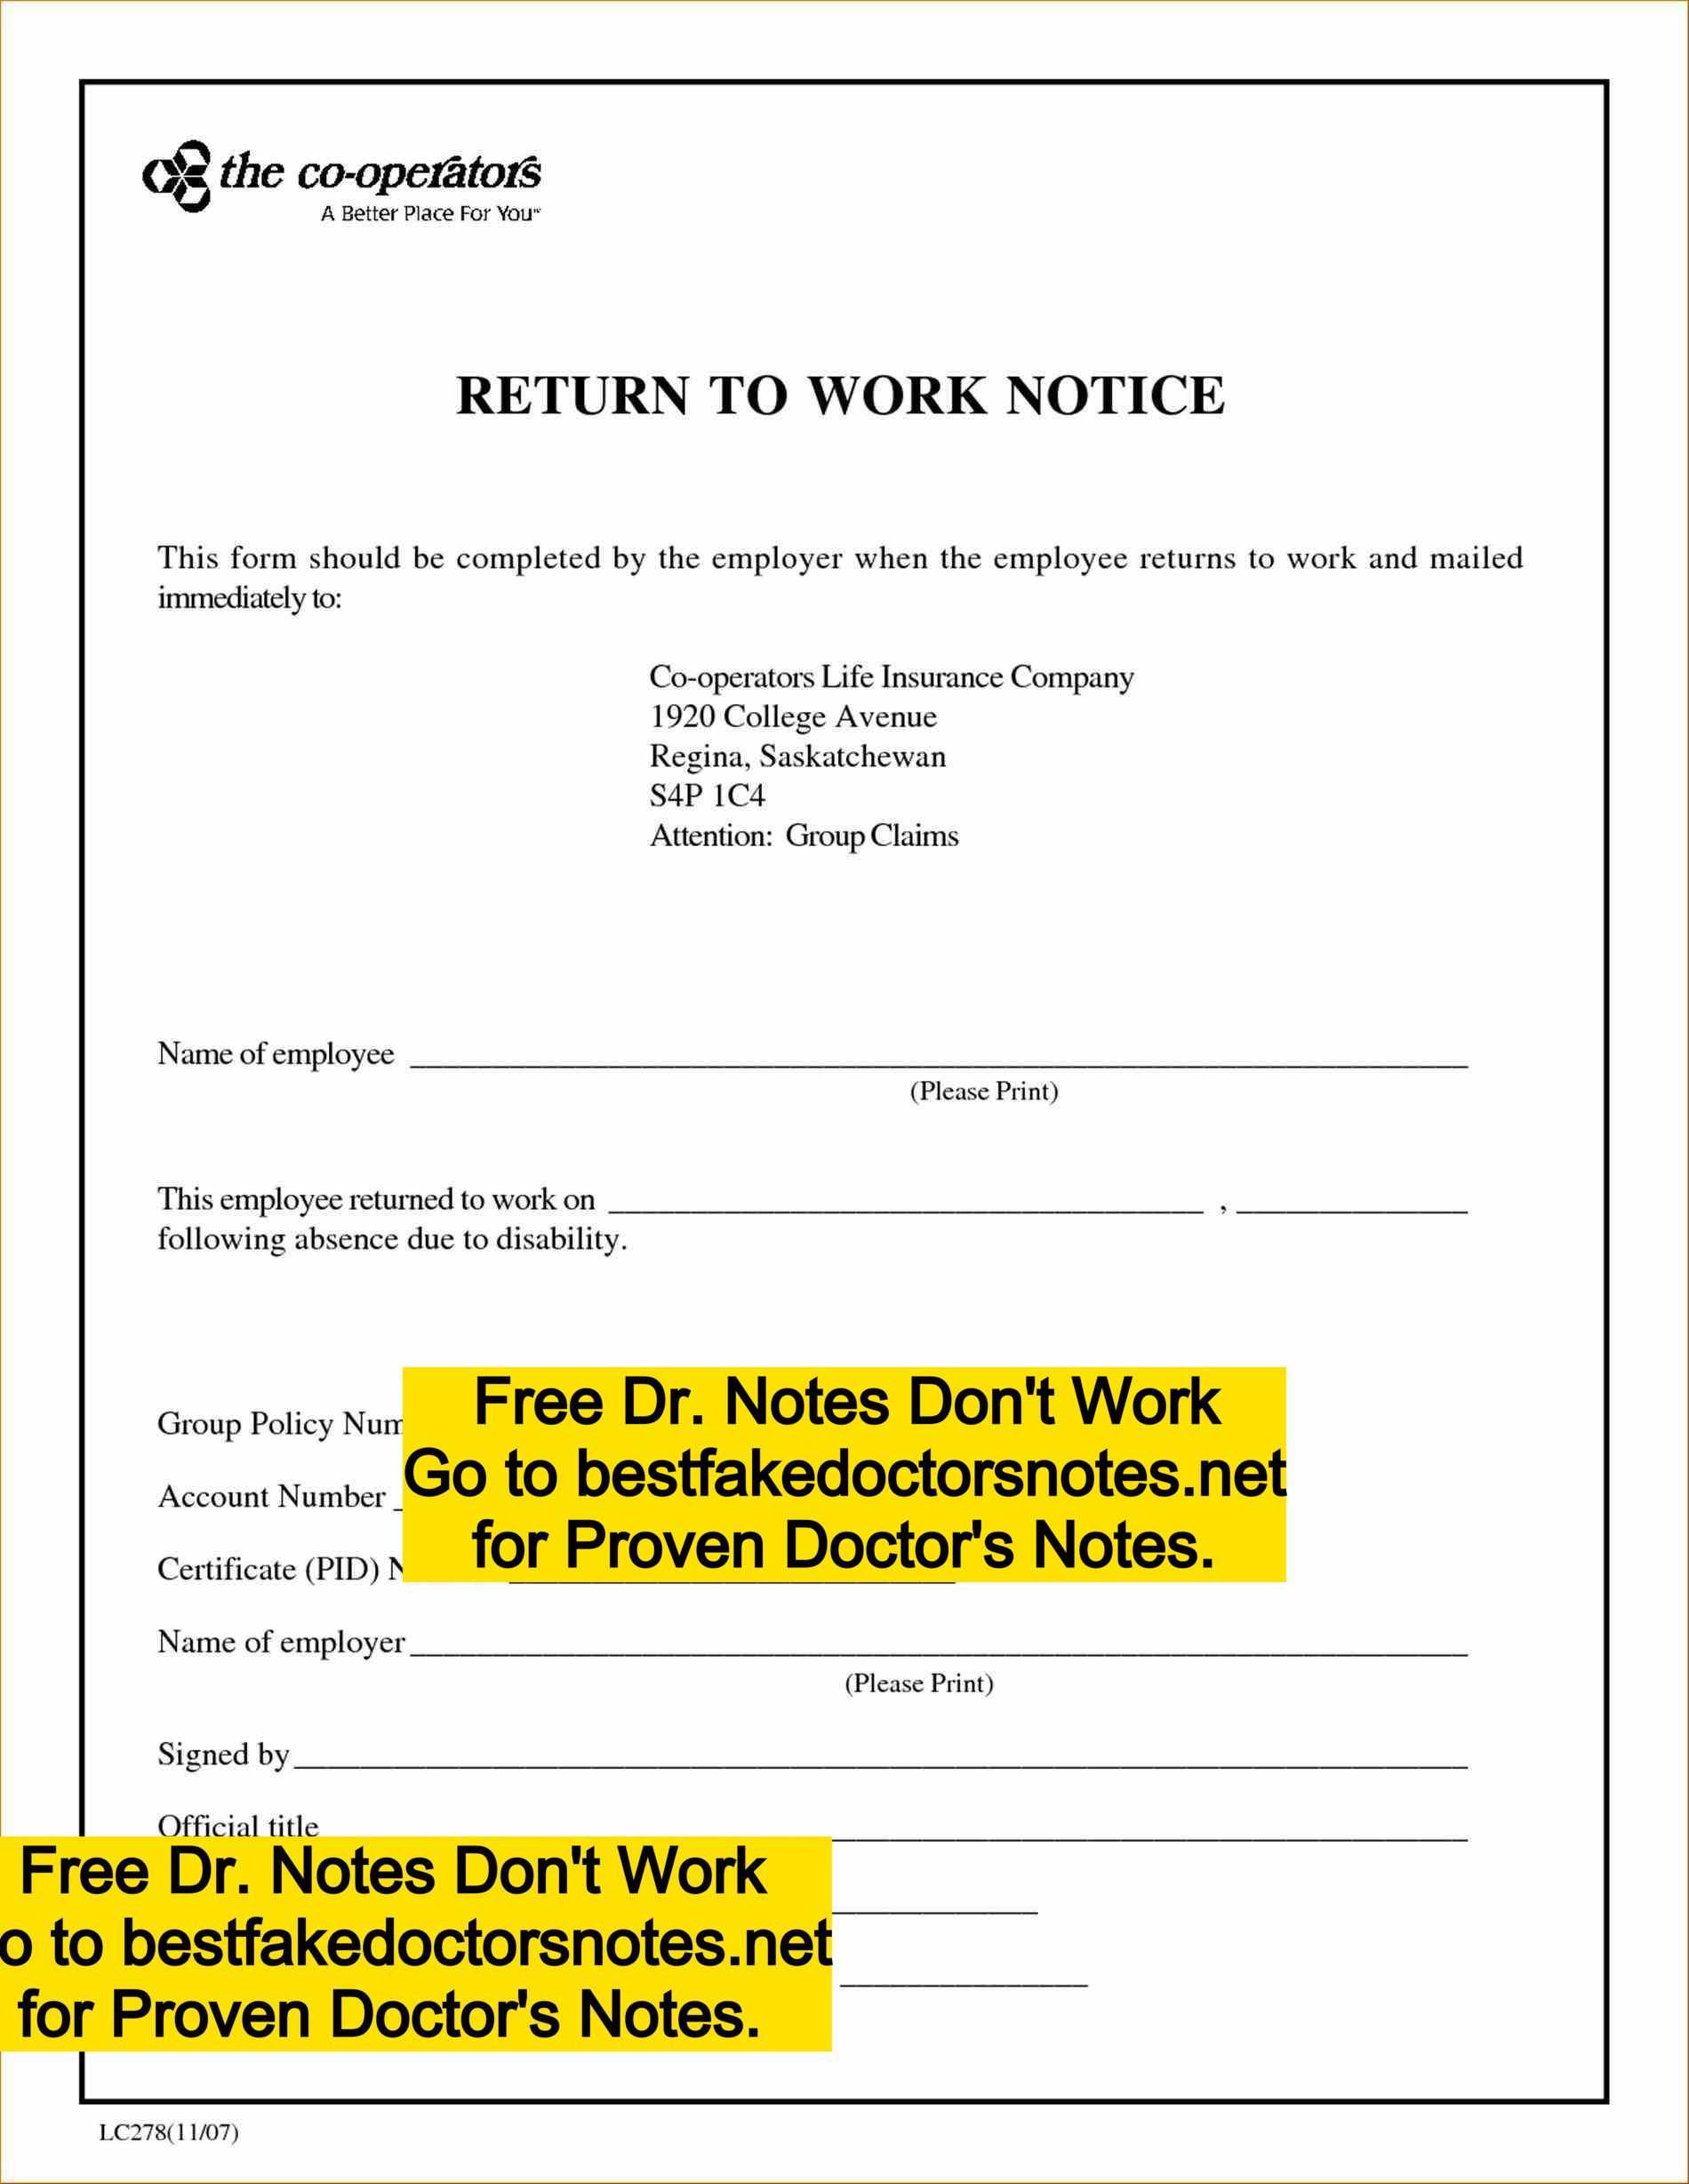 015 Dr Note Template For Work Amazing Ideas Doctors Free With Regard To Dr Notes Templates Free